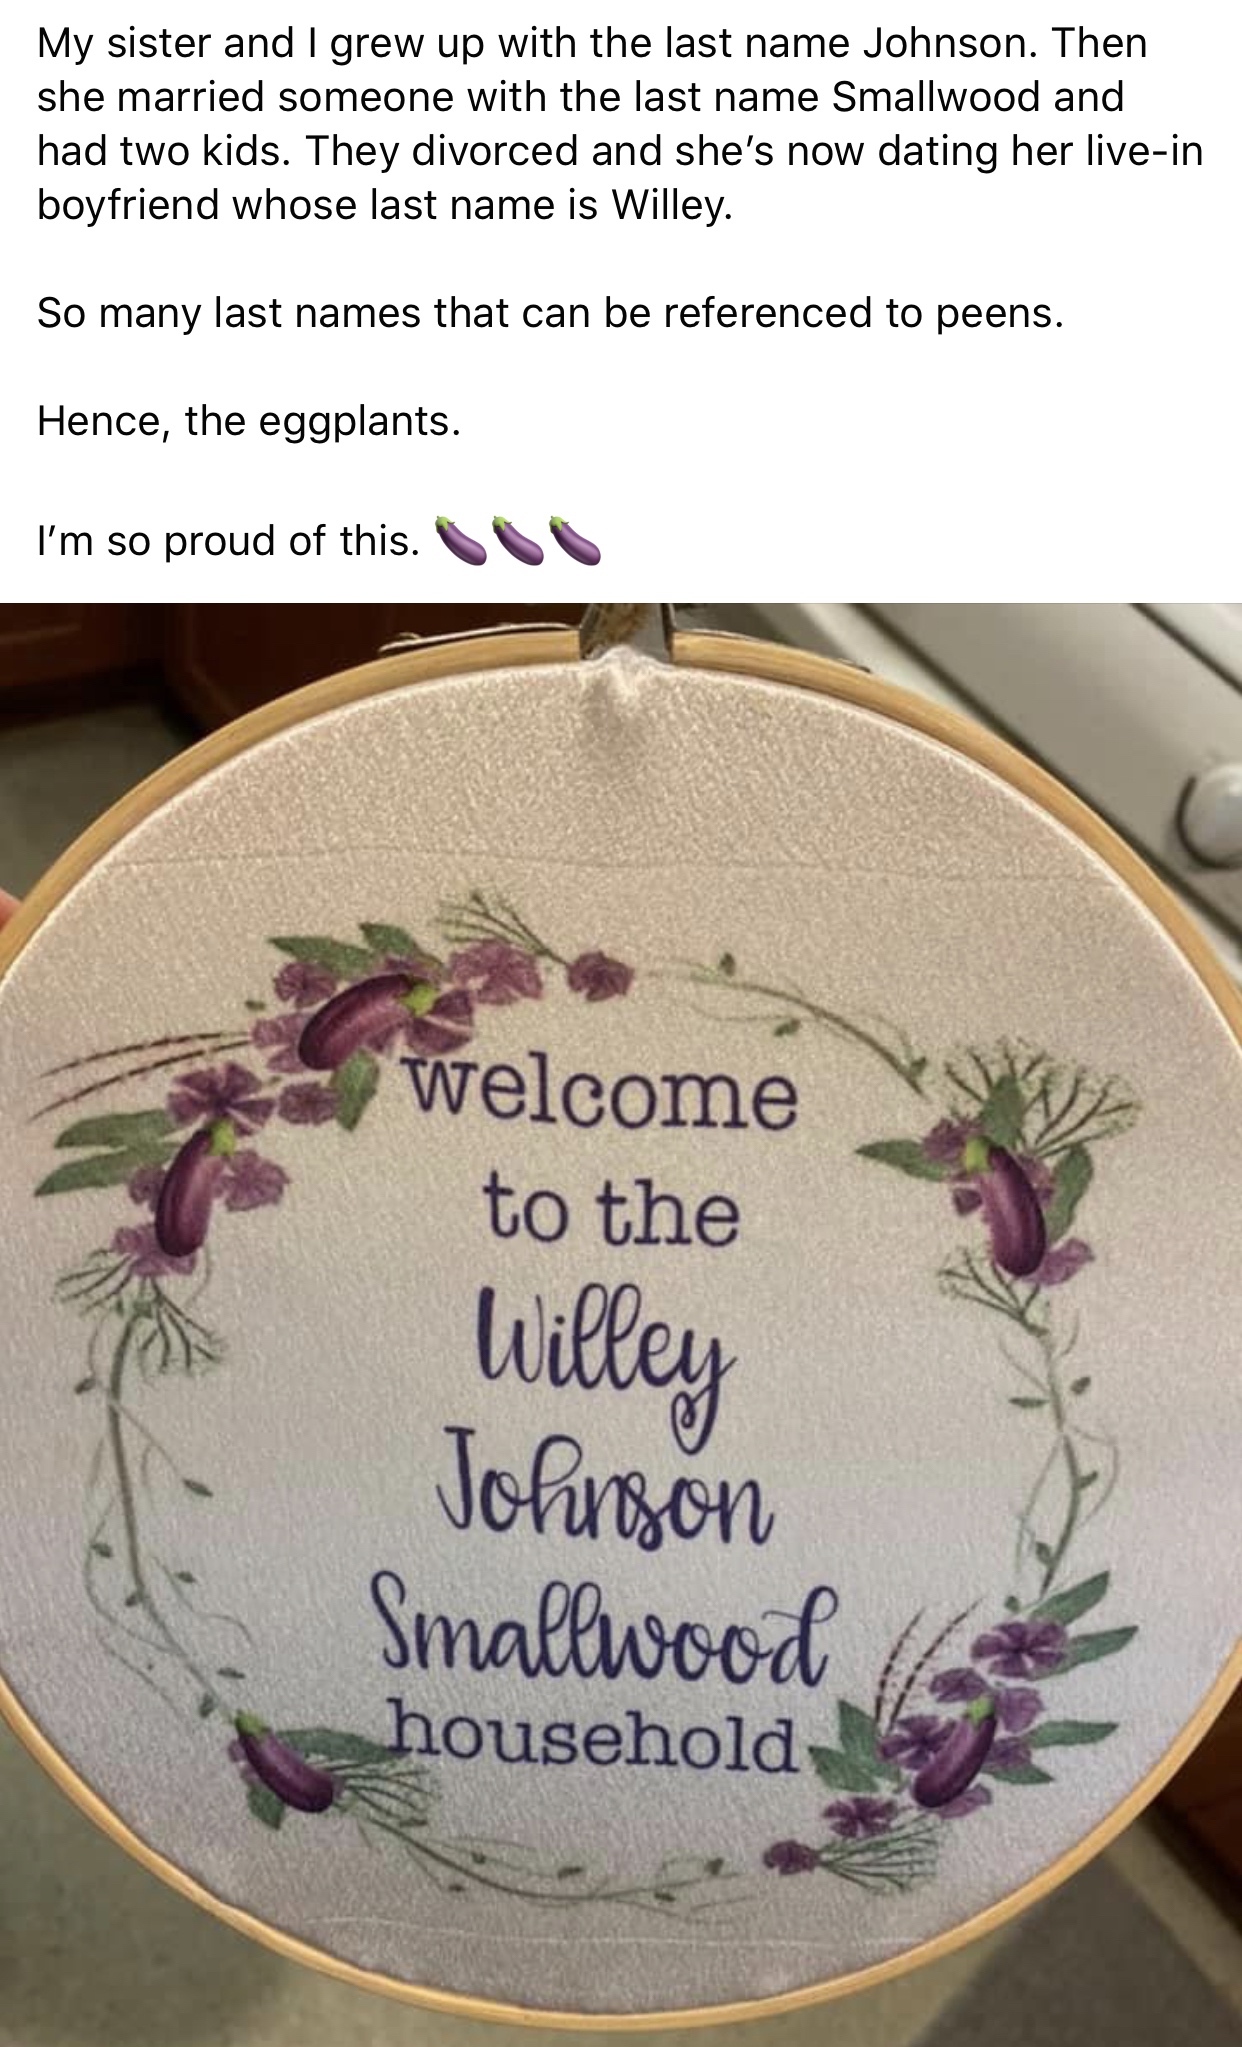 lavender - My sister and I grew up with the last name Johnson. Then she married someone with the last name Smallwood and had two kids. They divorced and she's now dating her livein boyfriend whose last name is Willey. So many last names that can be refere